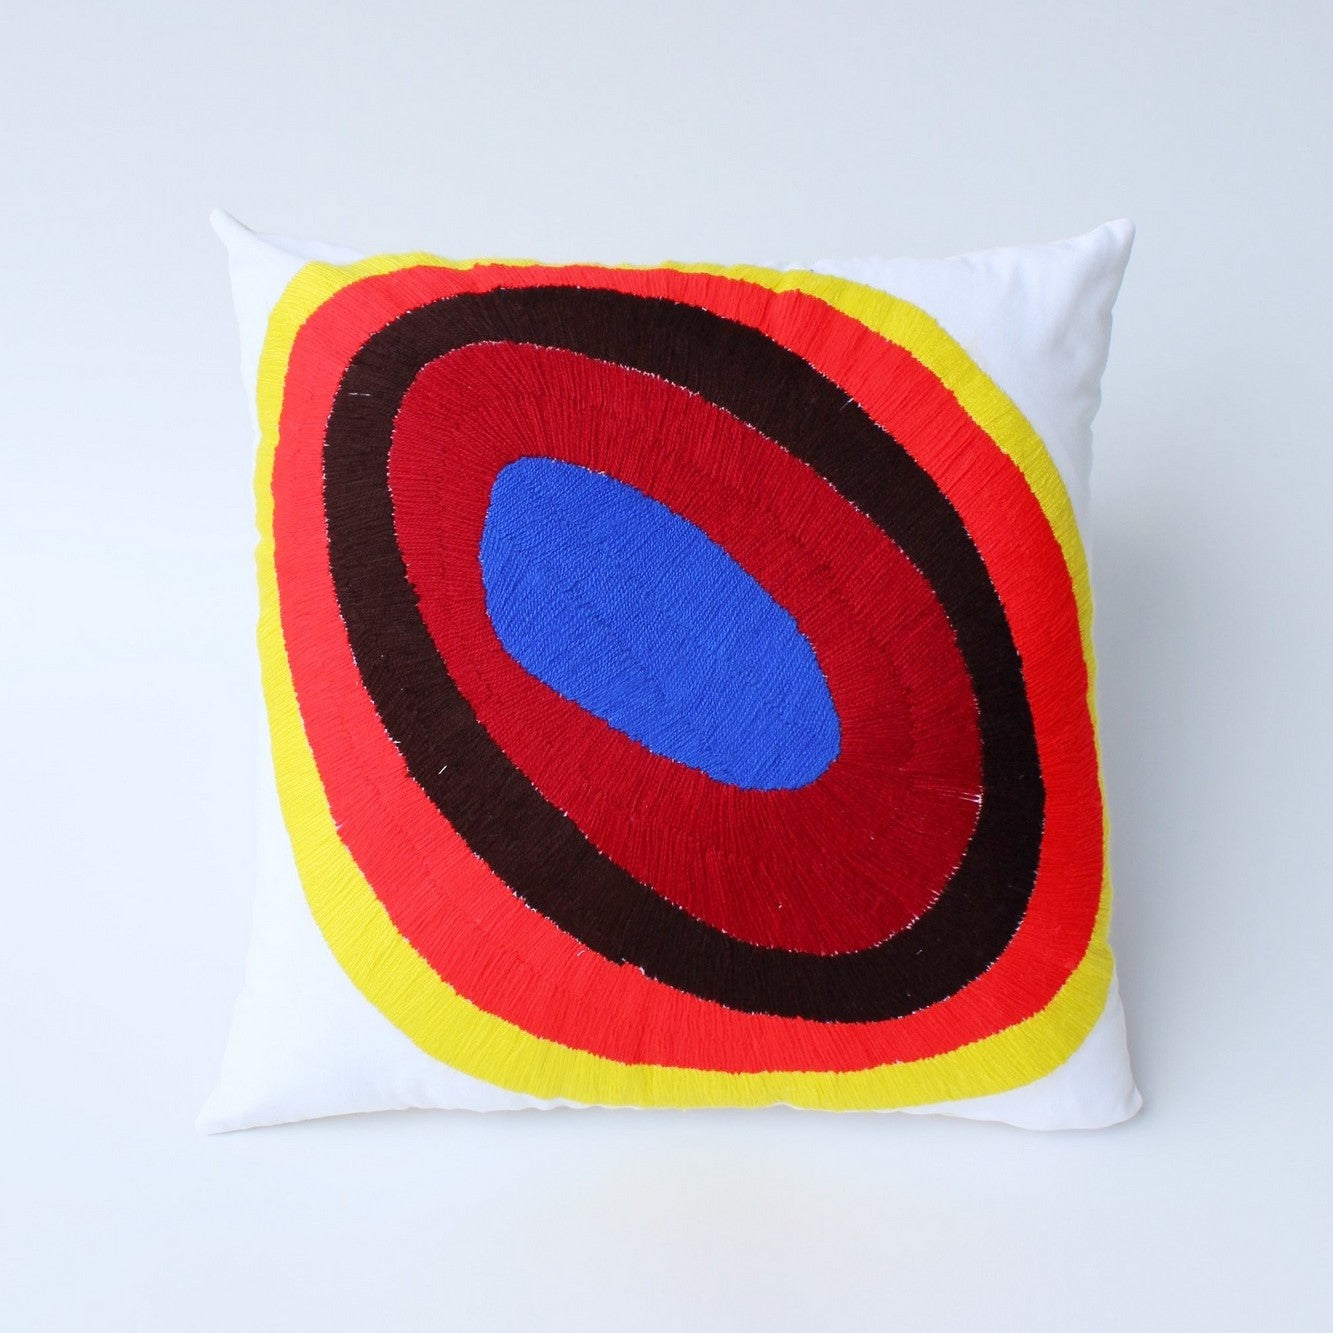 Embroidered pillow cover 16"x16" - Circles BLUE